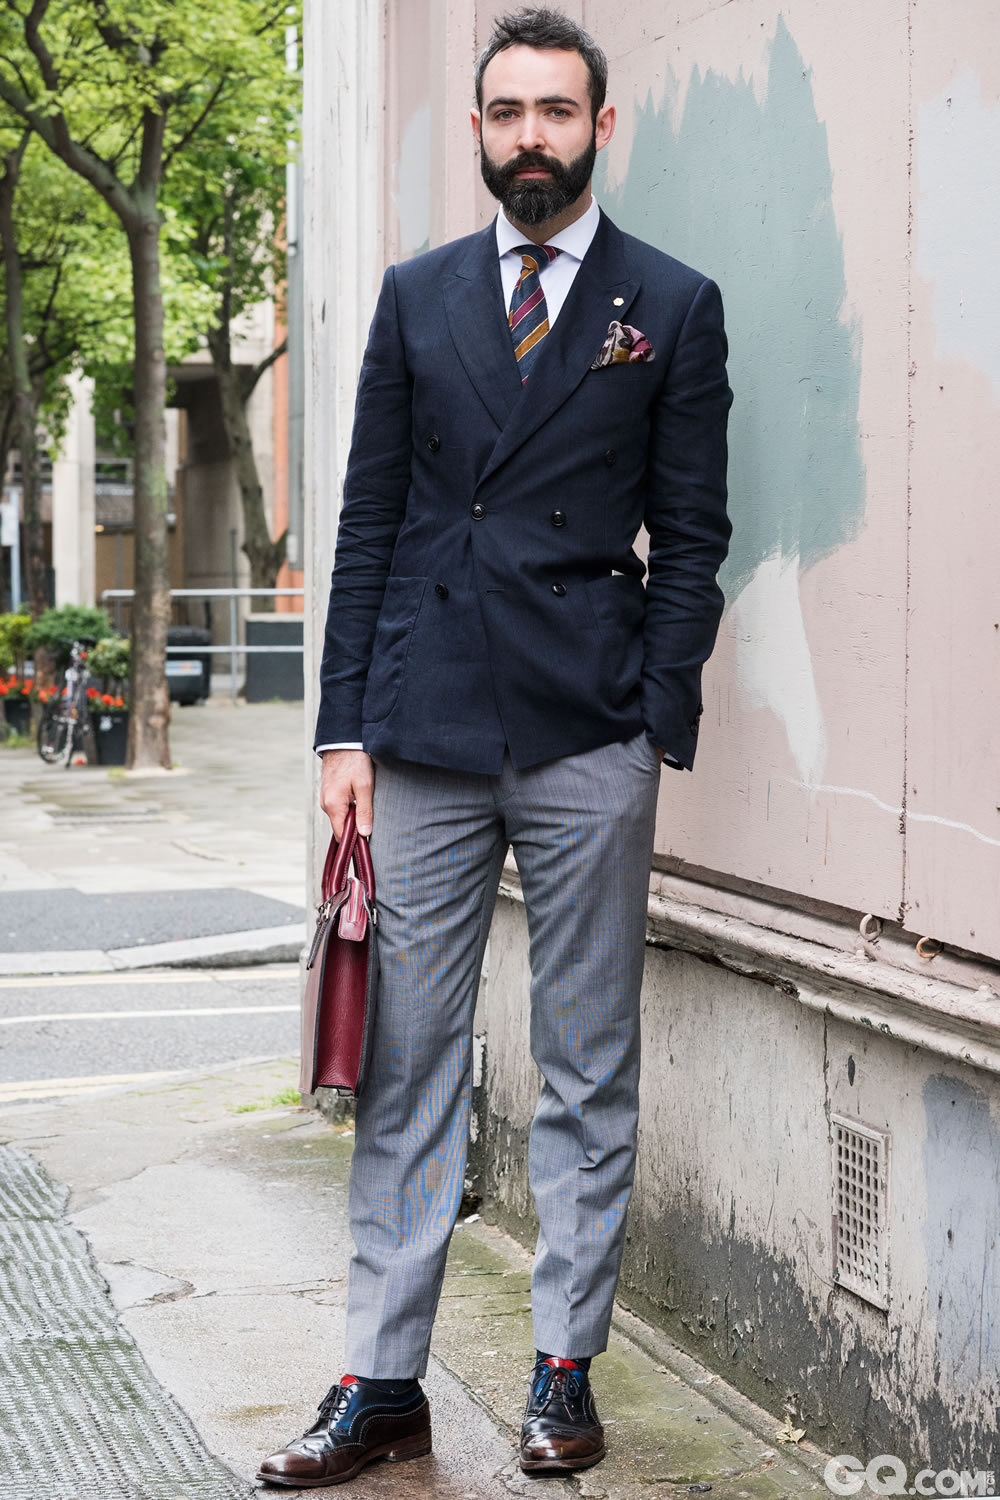 Chris
Jacket: Reiss
	Shirt:  Color Clock
	Tie: Shaun Bordon
	Trousers: Paul Smith
	Shoes Oliver: Sweeney 
	Bag: Tosting
	Socks: Panterela 
	
Inspiration: All last week I’ve been quite casual but there are a lot brands representing tailored clothing, that’s why it is Monday Chic?
(上一周我都穿的很随便，但也会穿很多量身定制的牌子，这就是为什么叫“Monday Chic”)